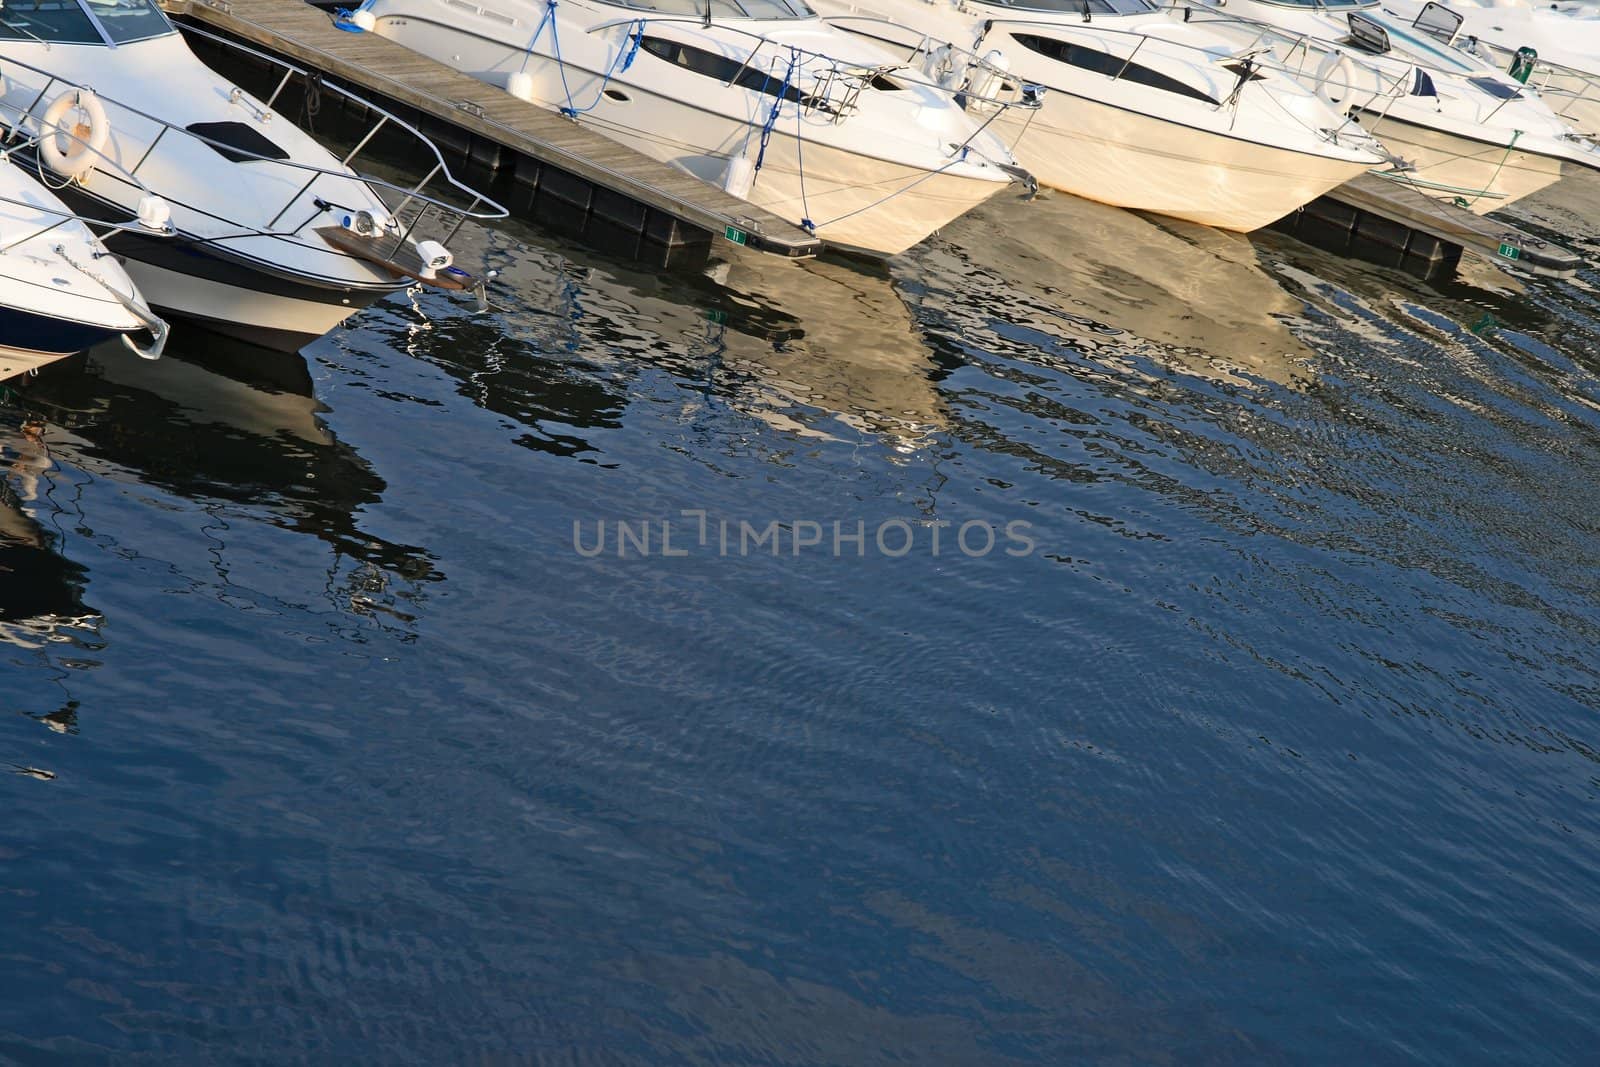 Motorboats in a harbor reflecting in water.